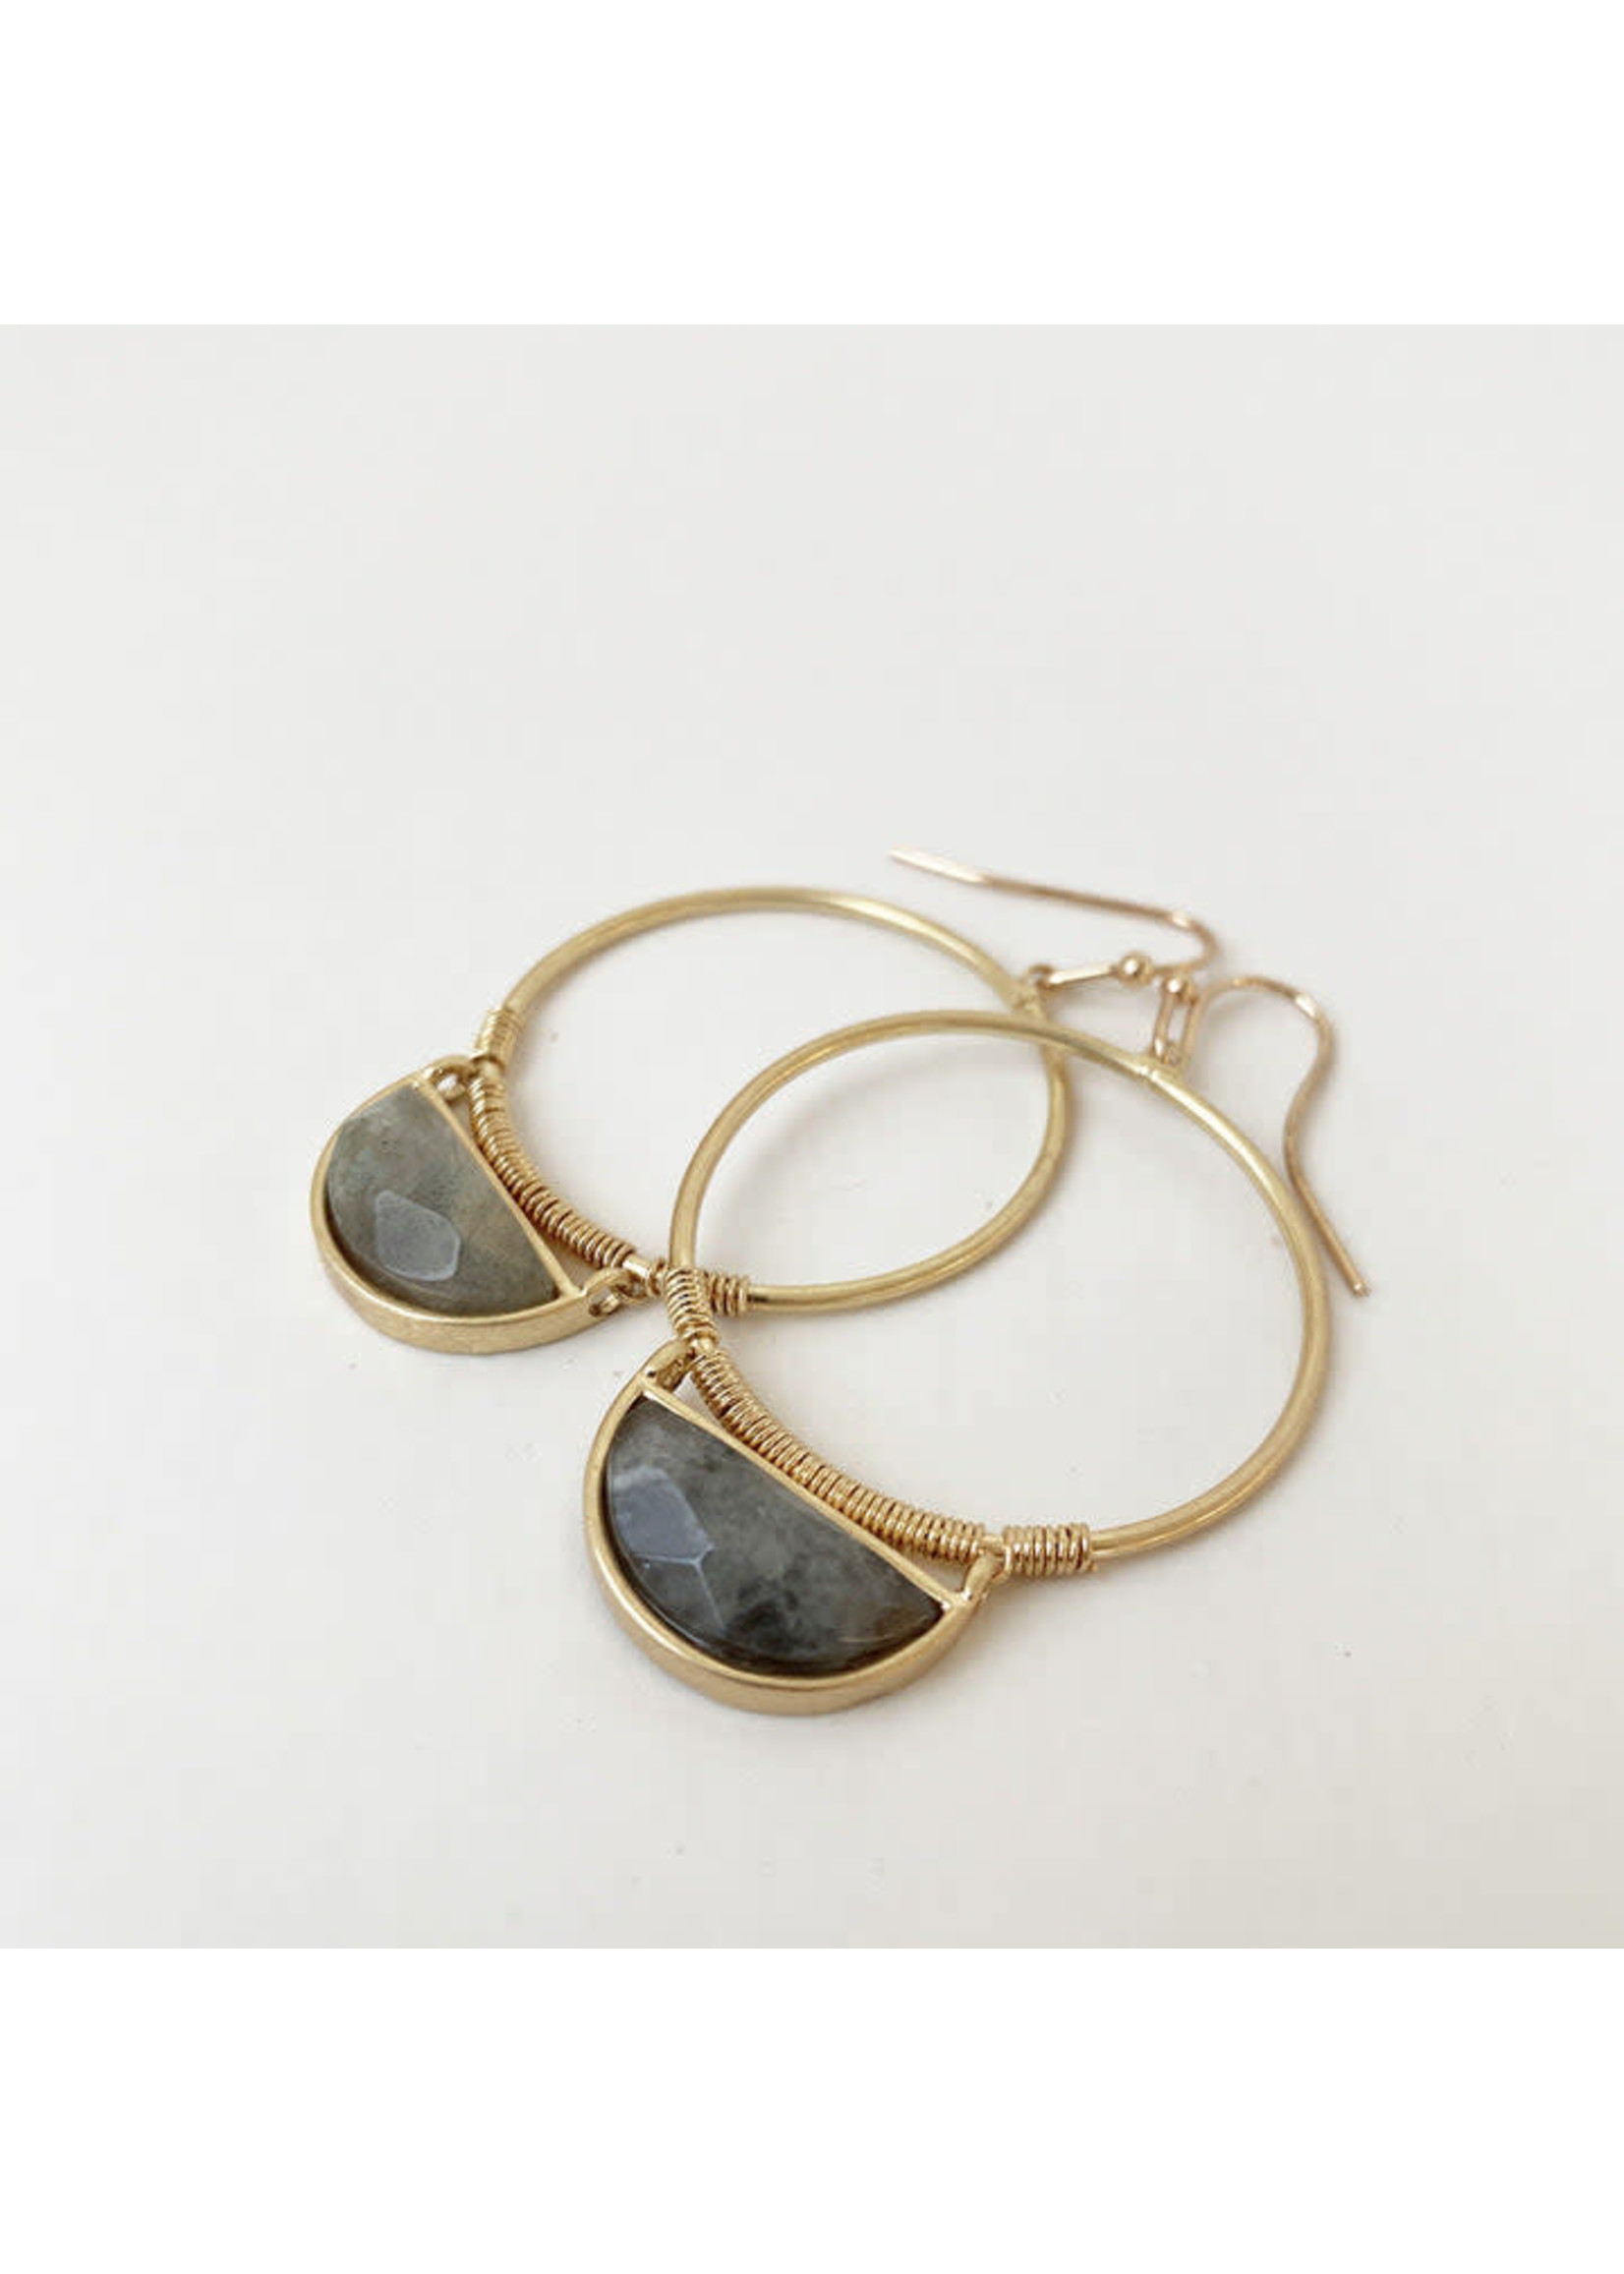 Grey & Gold Hoops with a Real Stone Drop